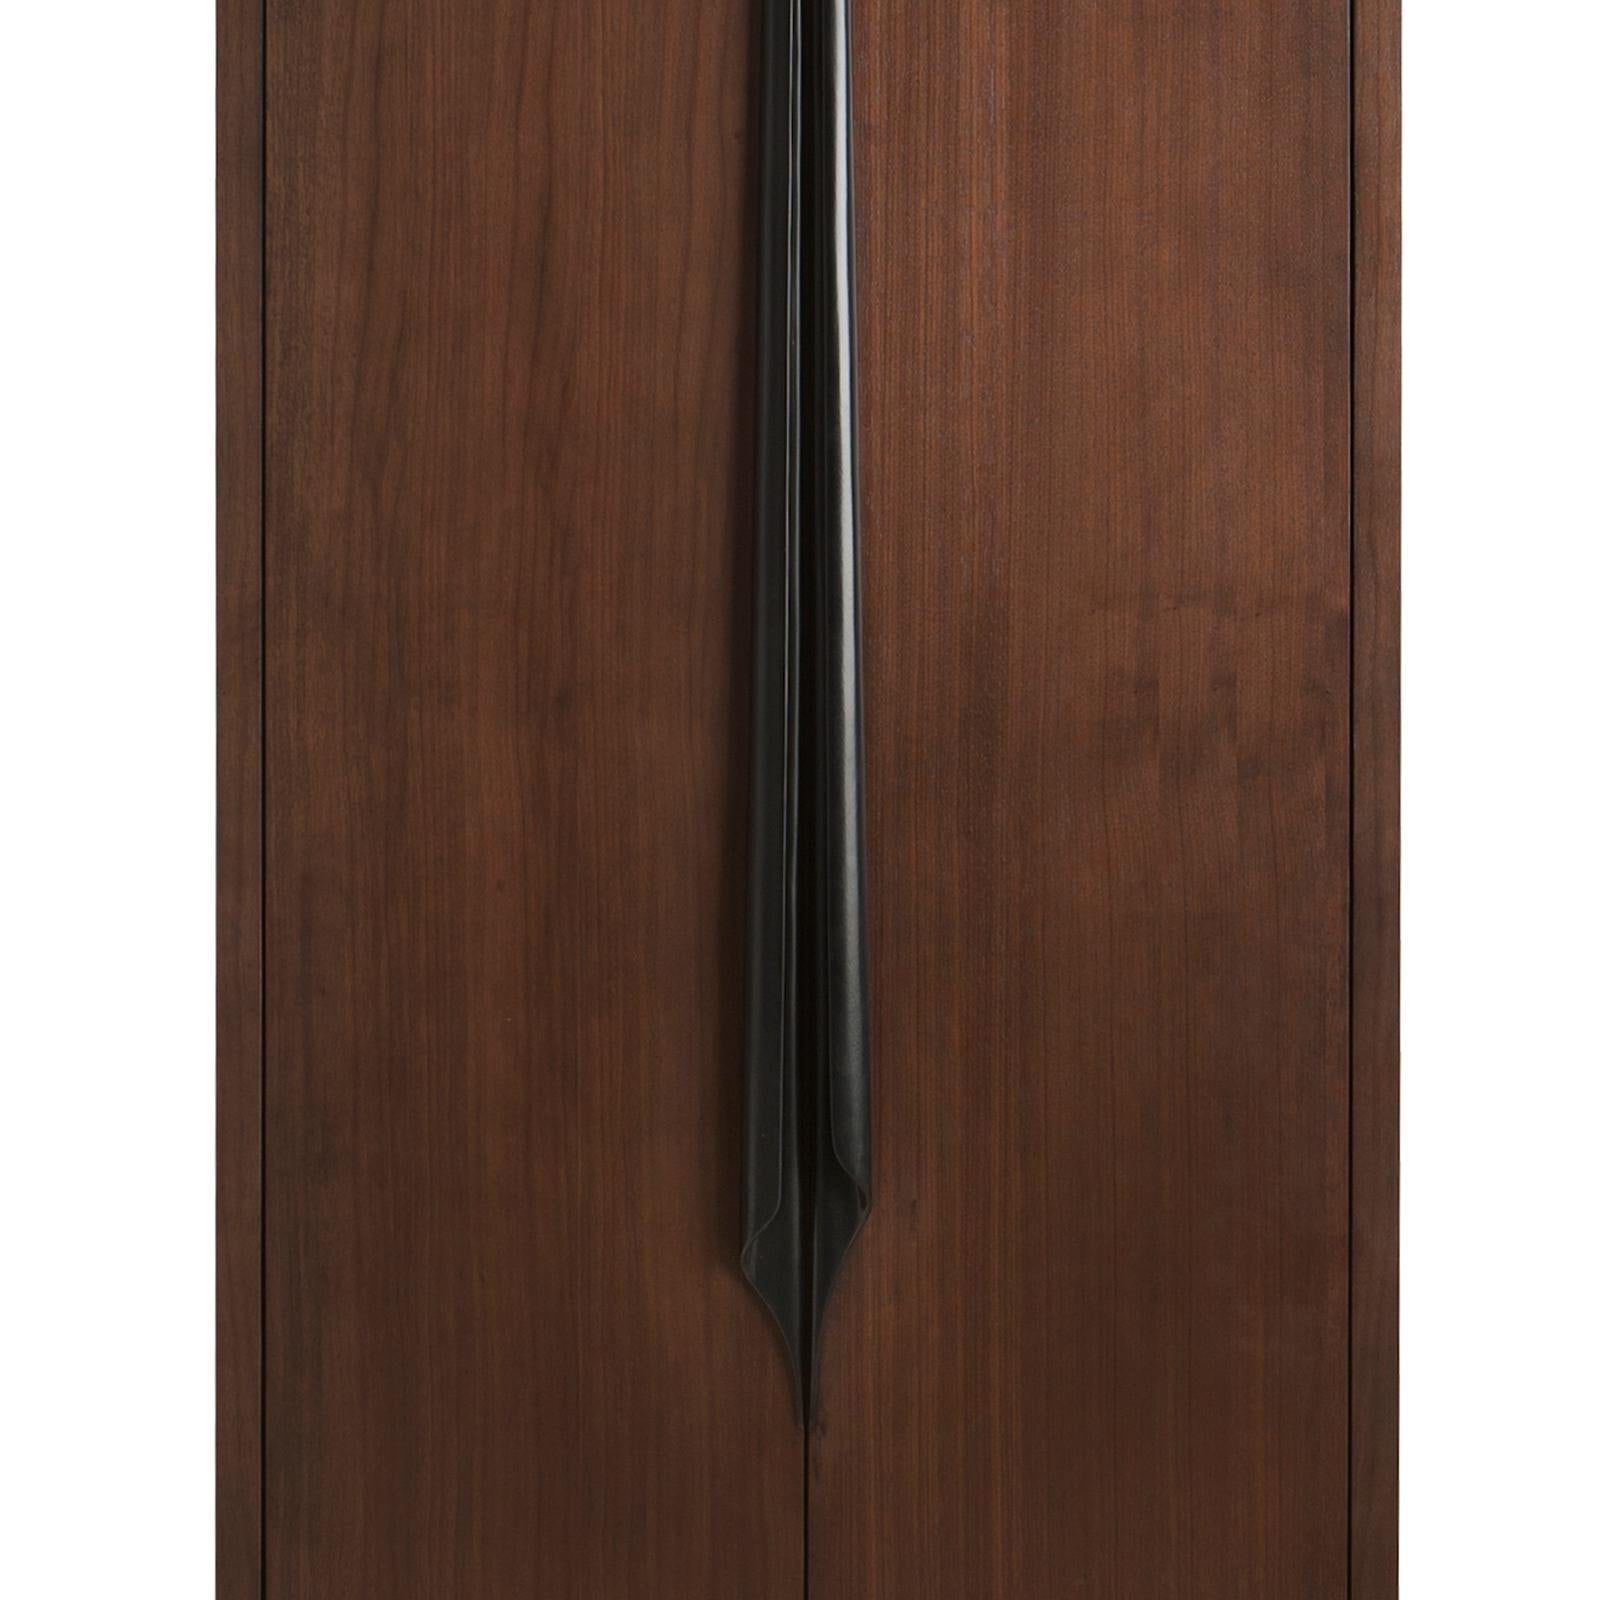 Distinct Medium Cabinet in Mahogany Wood In Excellent Condition For Sale In Paris, FR